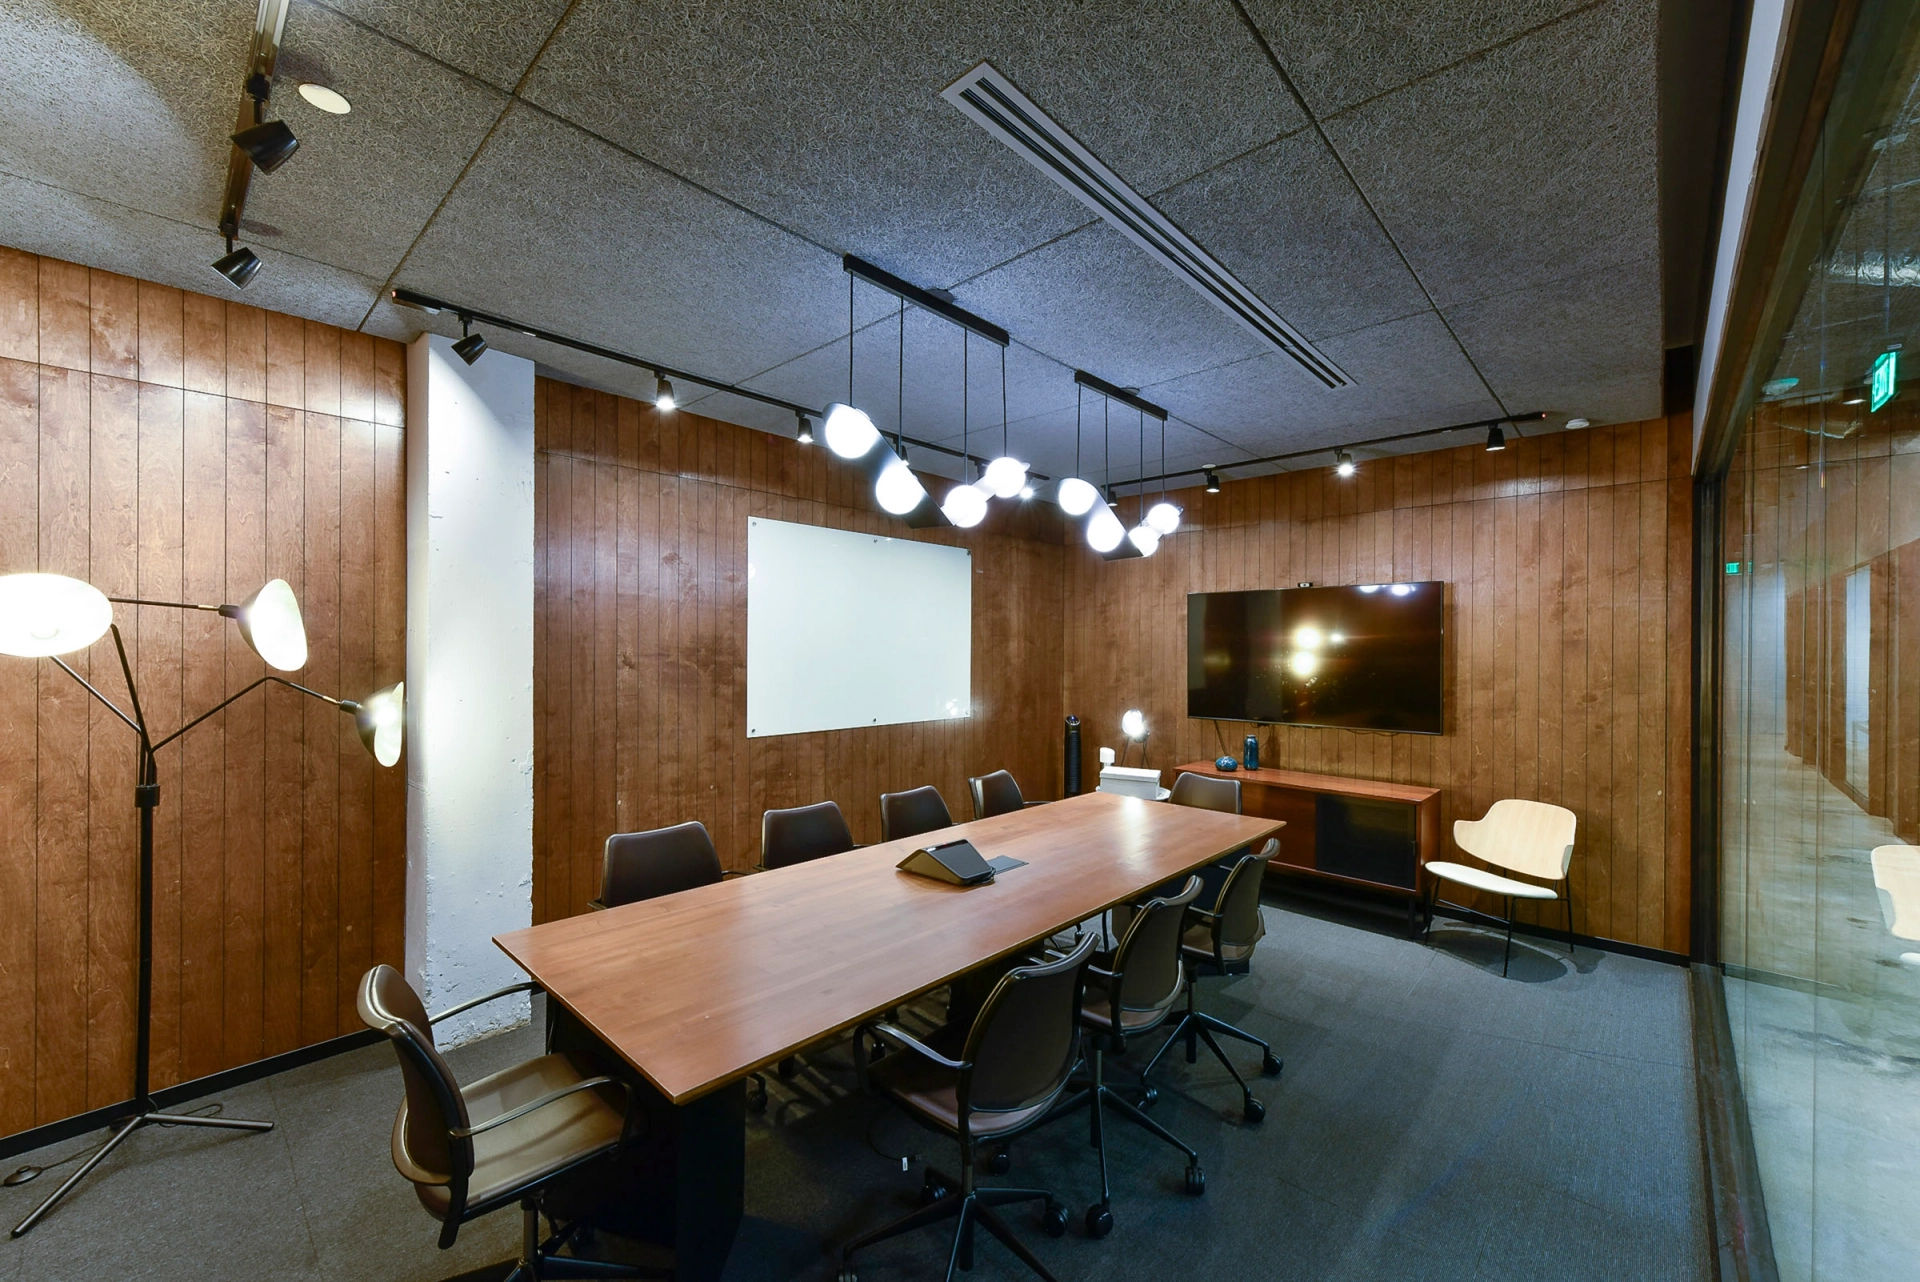 A coworking office in Atlanta with wooden table and chairs for conferences.